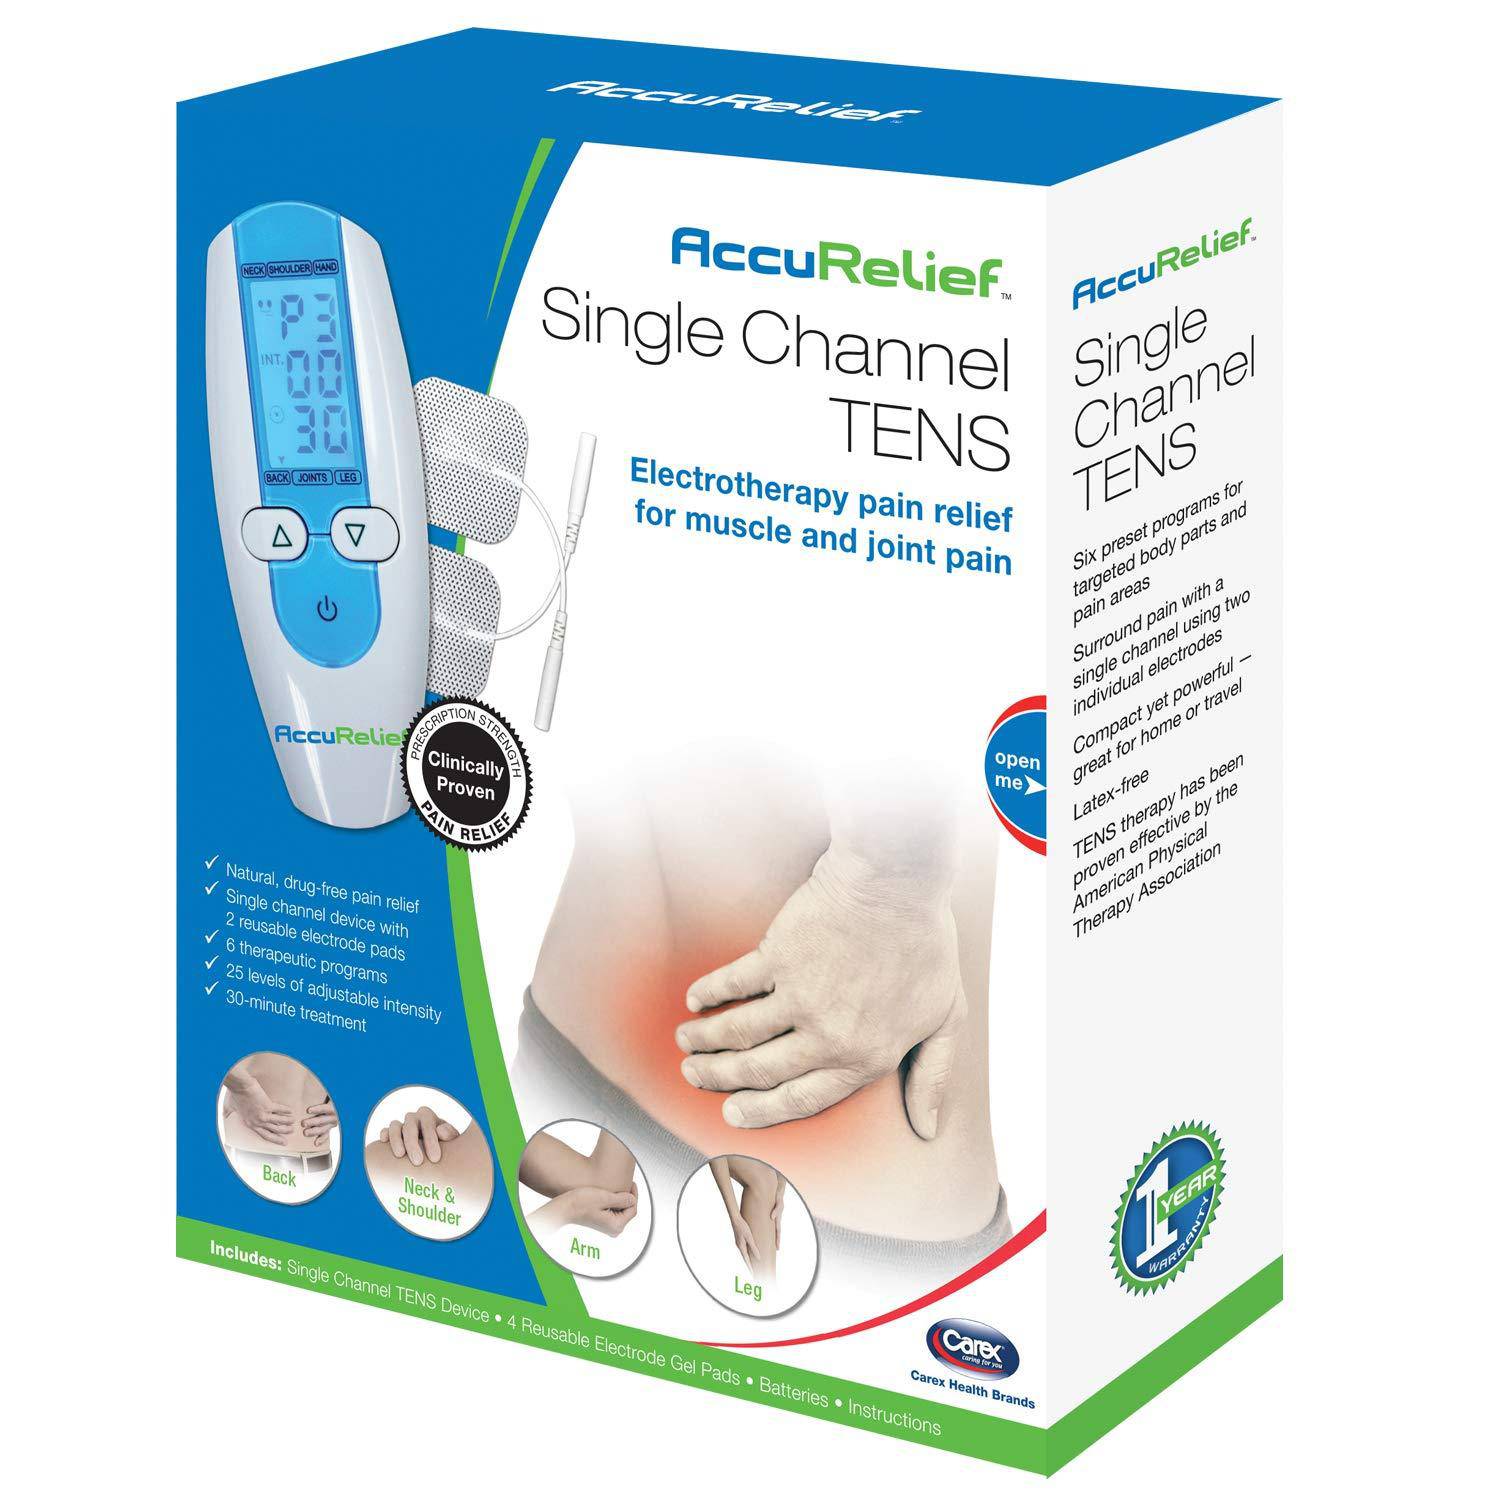 Full-Body TENS Pain Relief Therapy with Foot Attachment